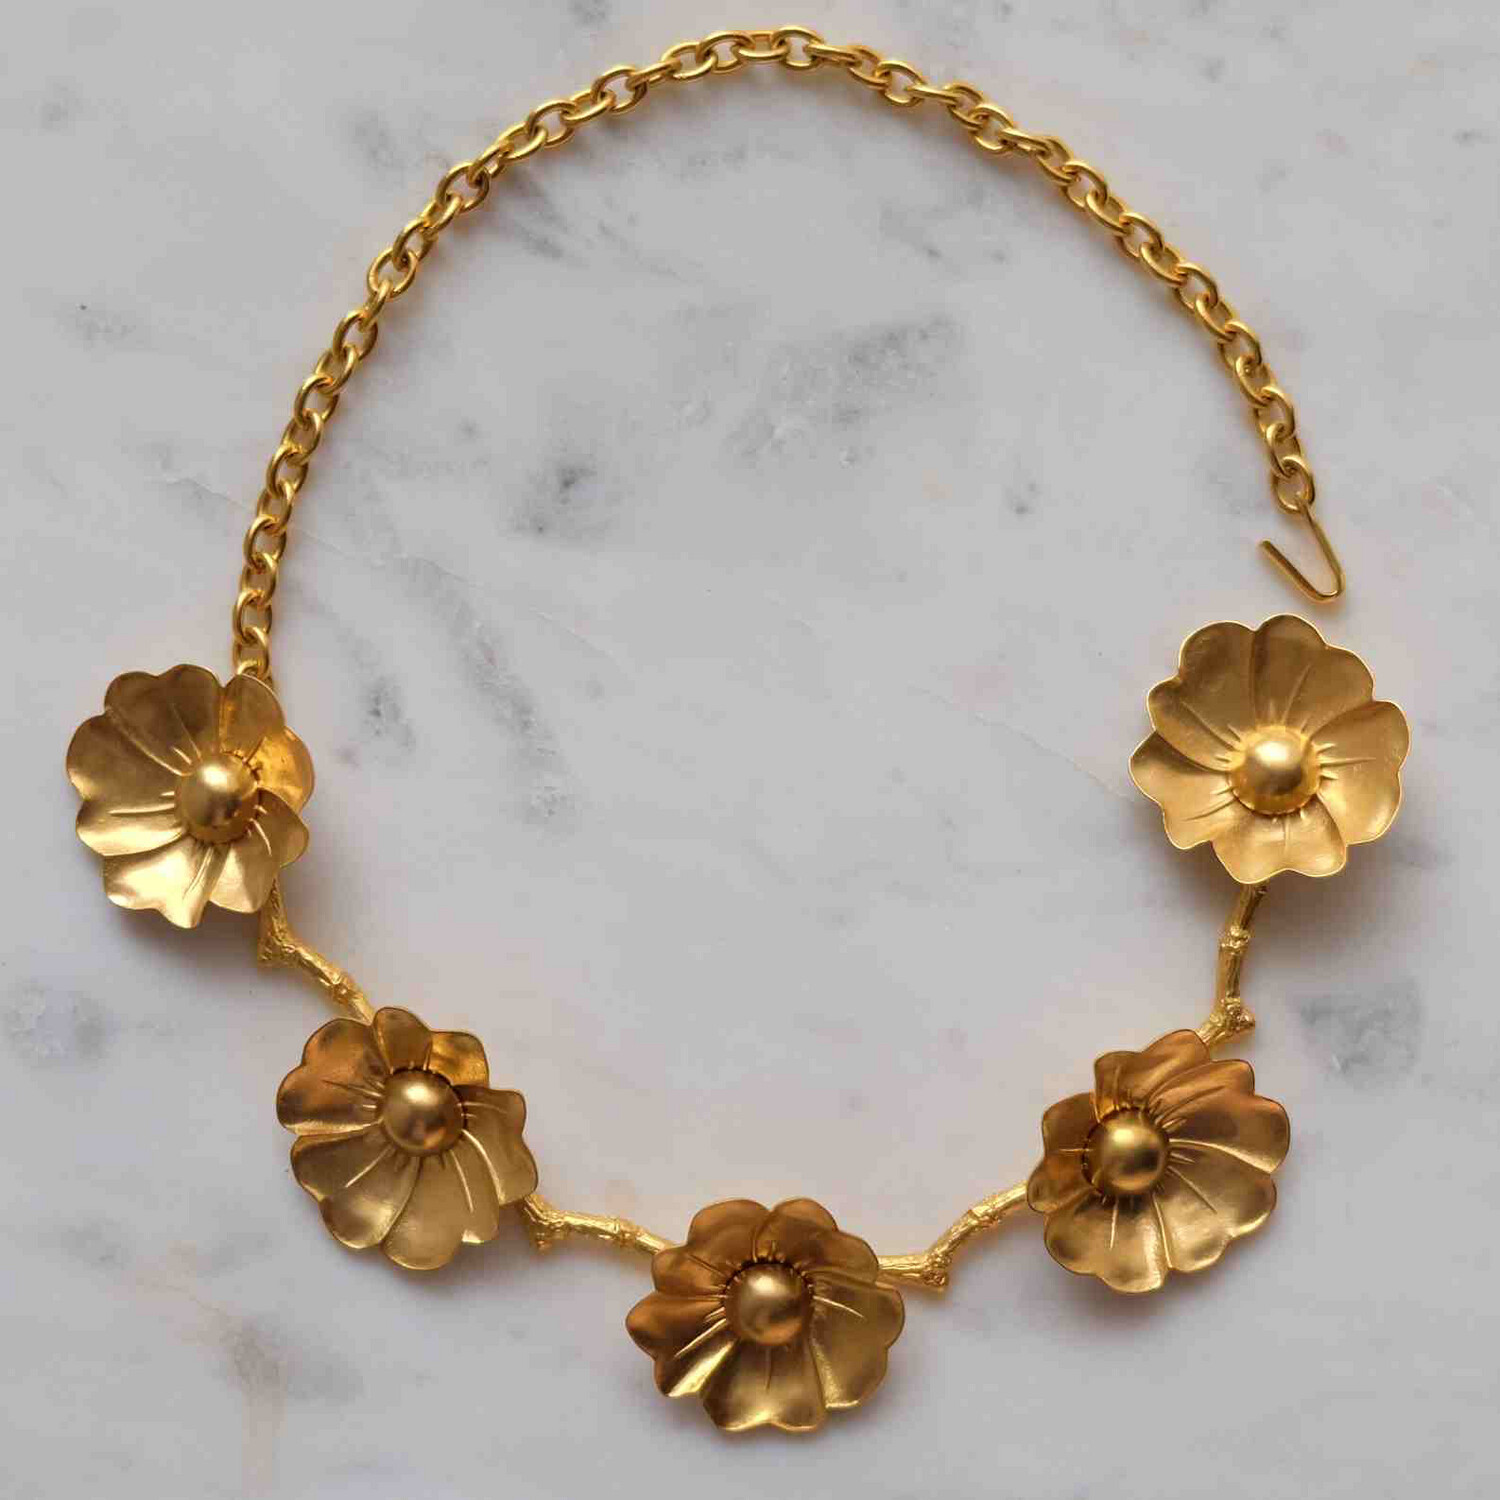 Vintage Kenzo Flowers Necklace 2000s